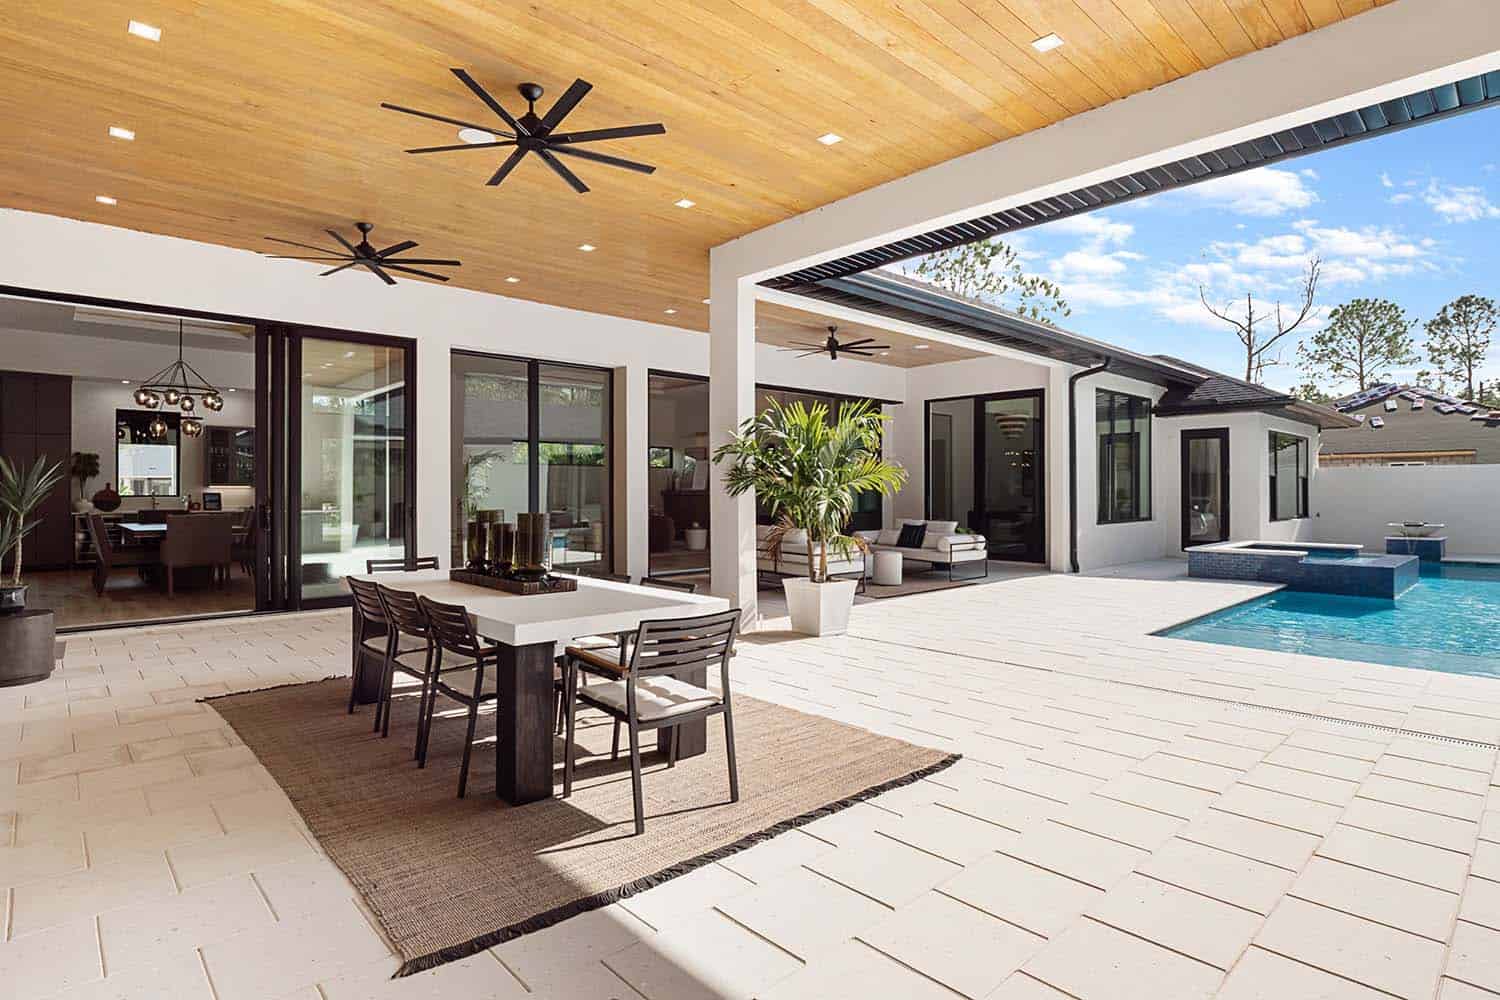 modern tropical model home exterior with a covered patio and outdoor furniture